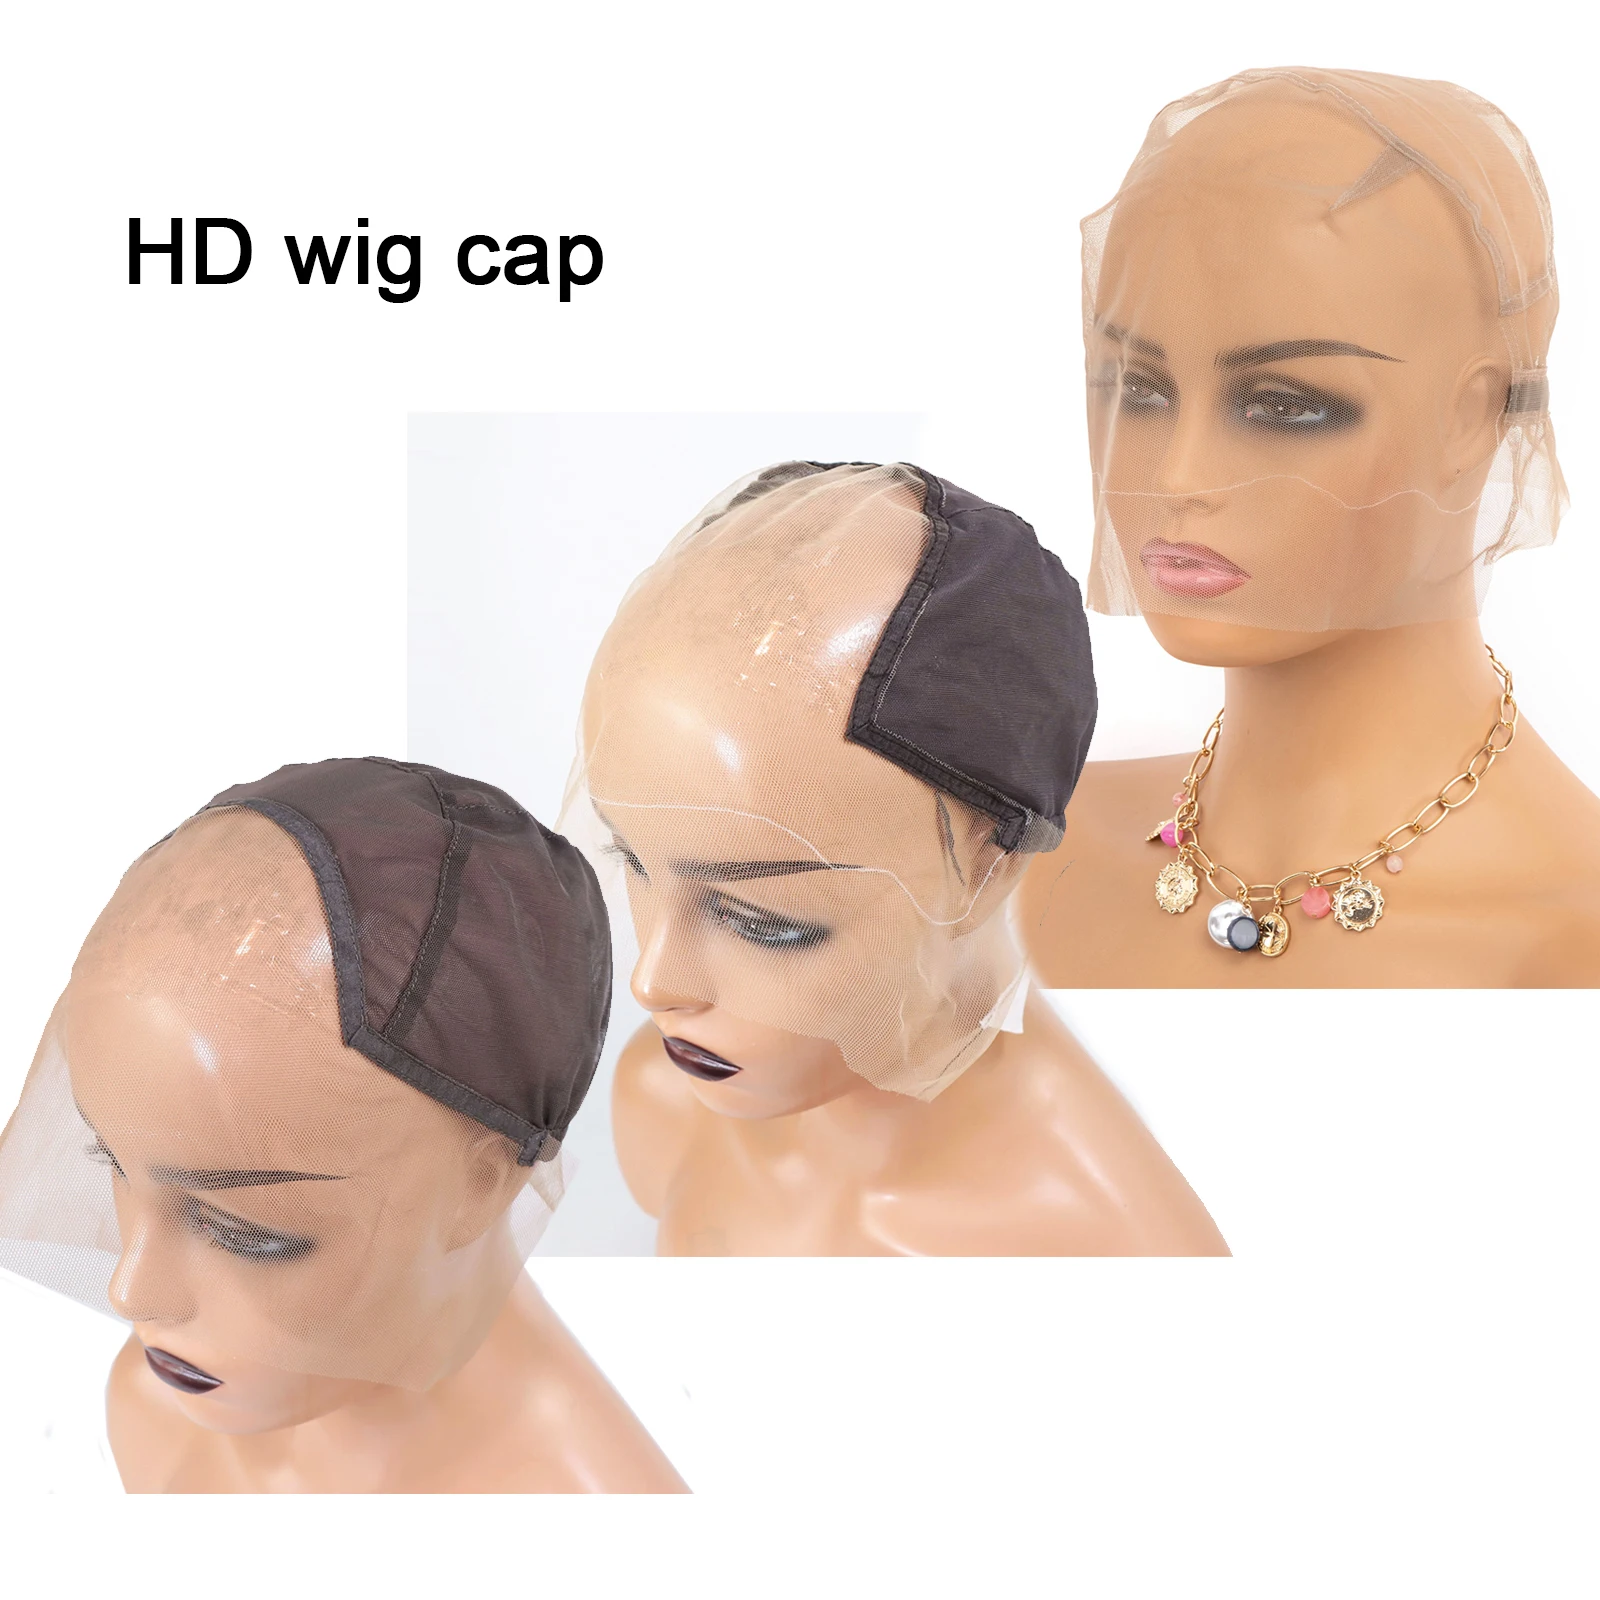  BTWTRY HD Full Lace Wig Net Material Real Swiss Lace